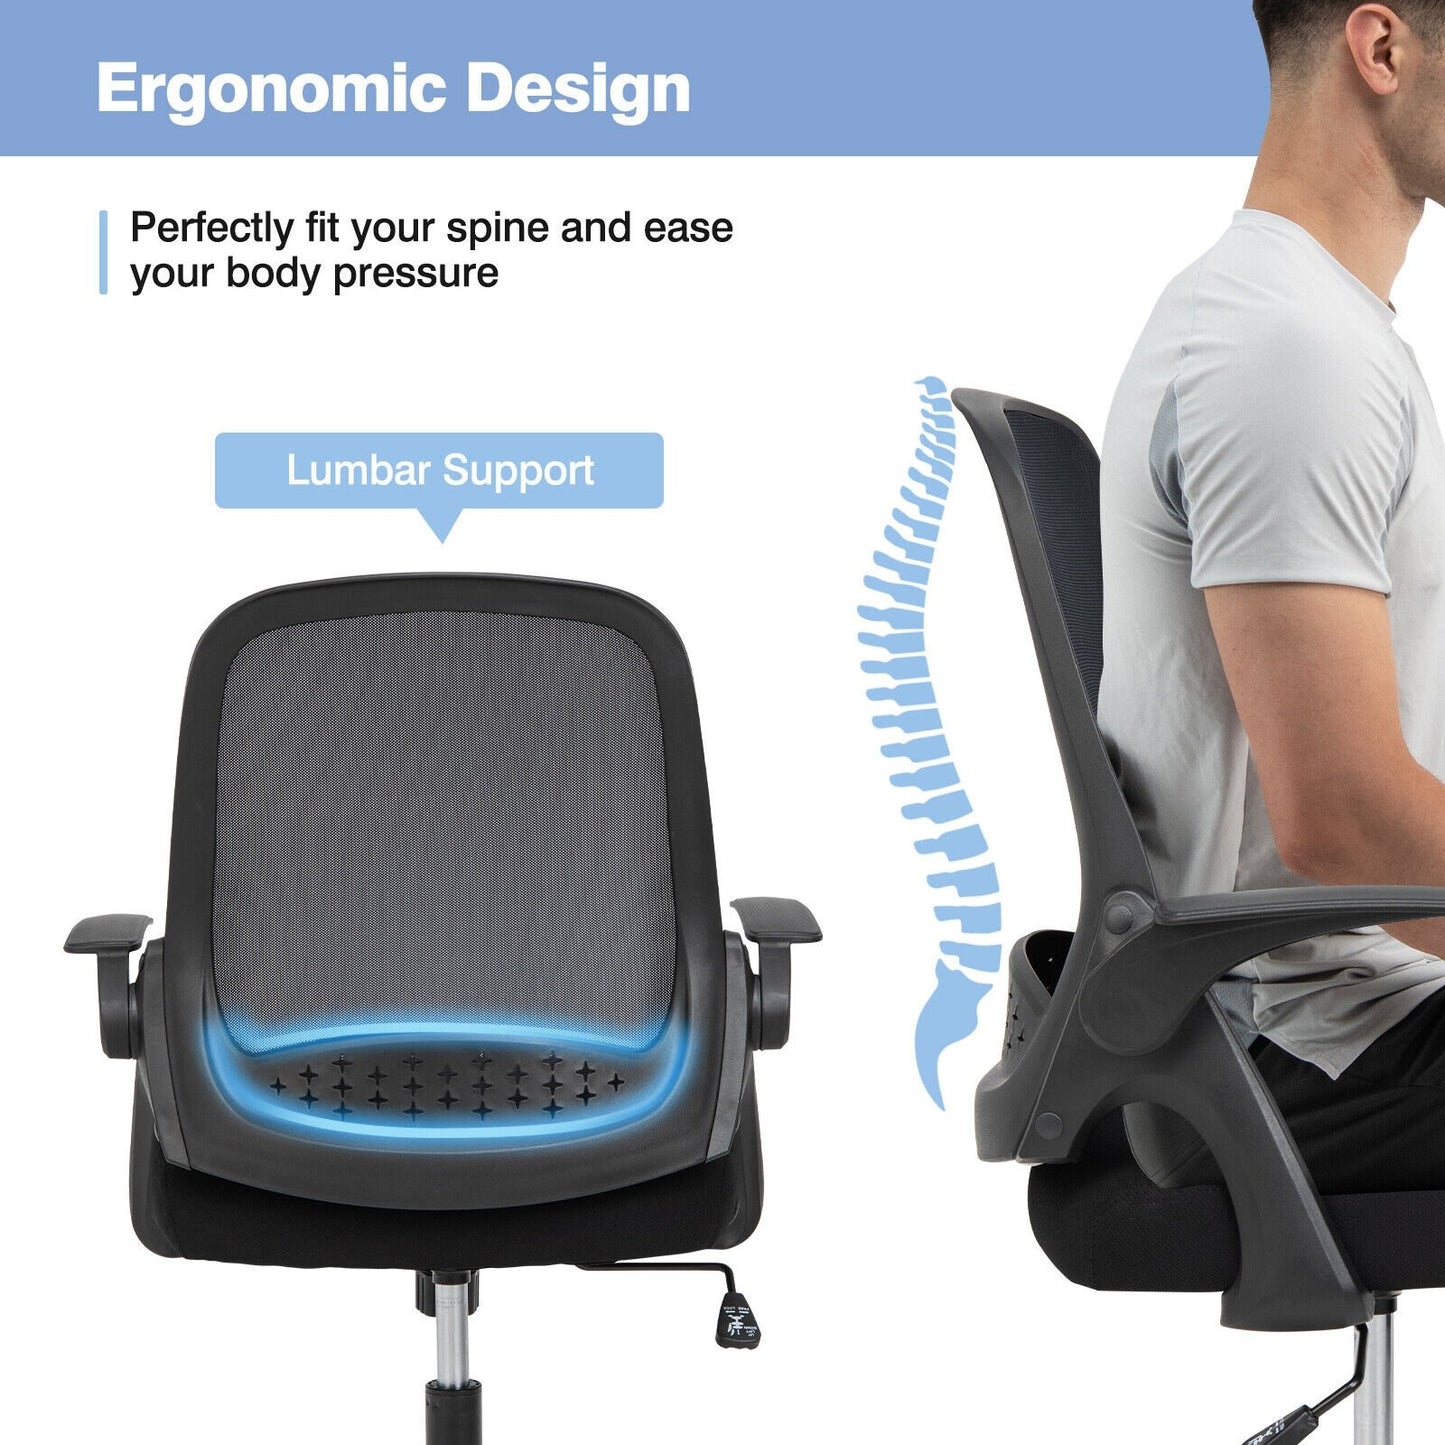 Adjustable Mesh Office Chair Rolling Computer Desk Chair with Flip-up Armrest, Black at Gallery Canada